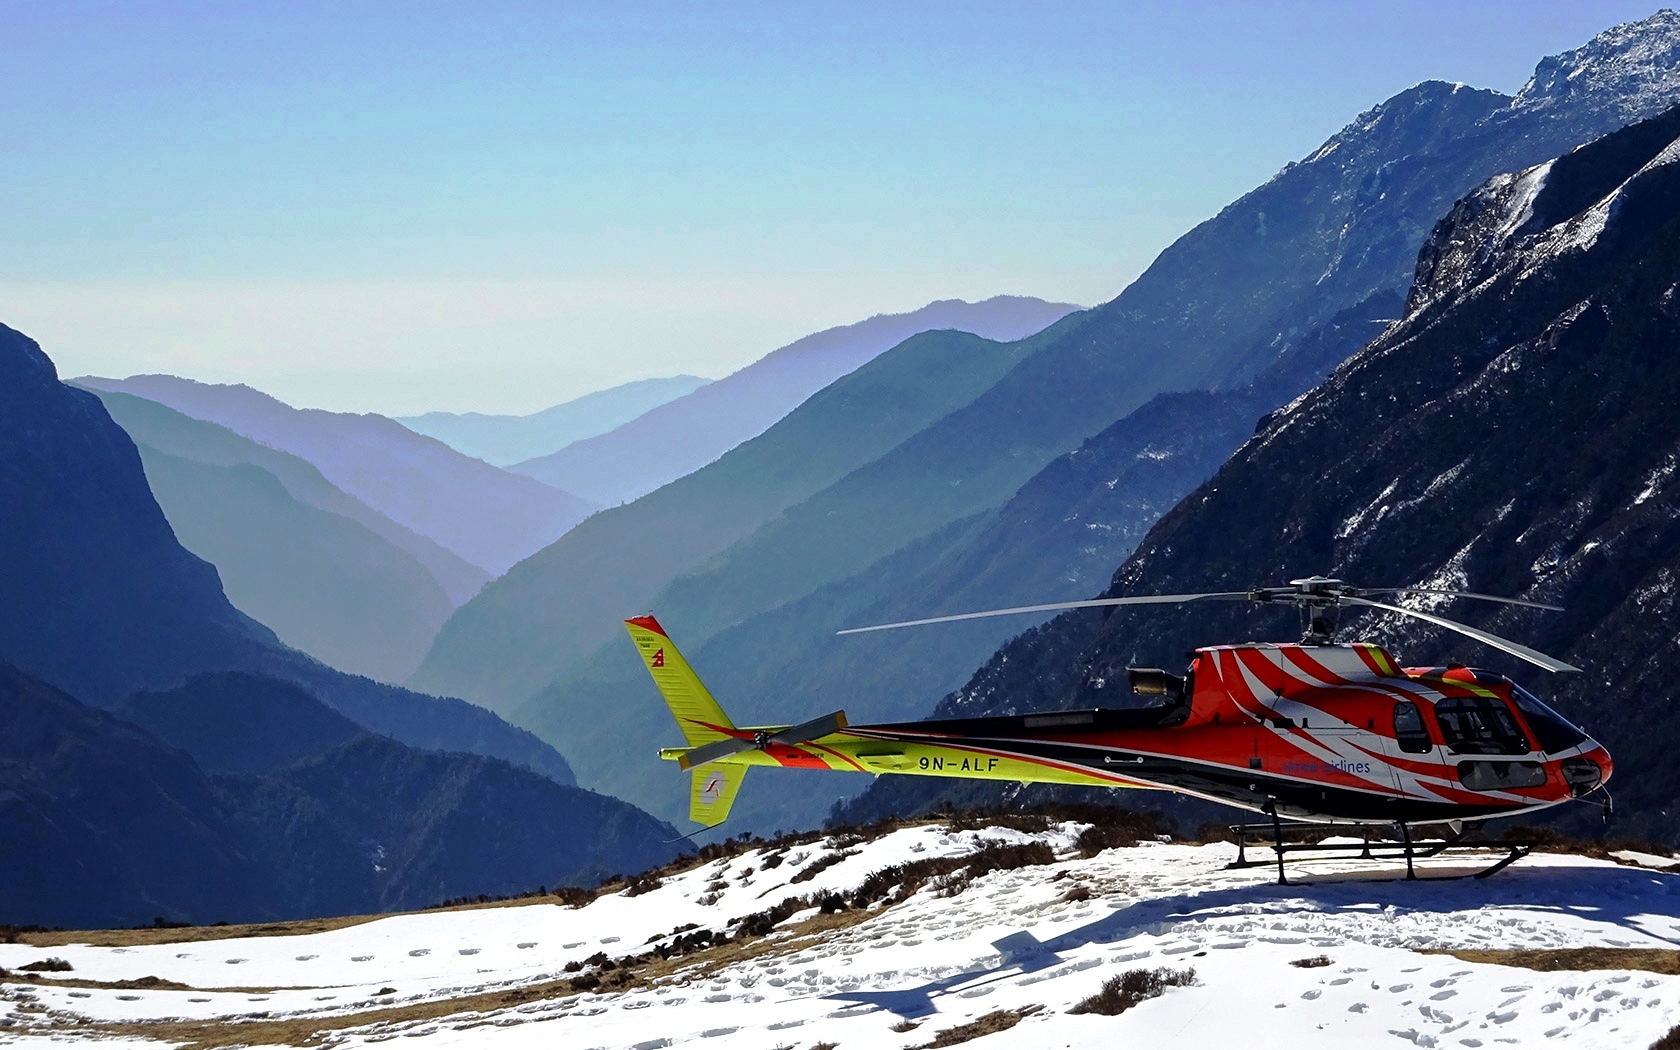 Morocco helicopter tour to the Atlas Mountains from Marrakech